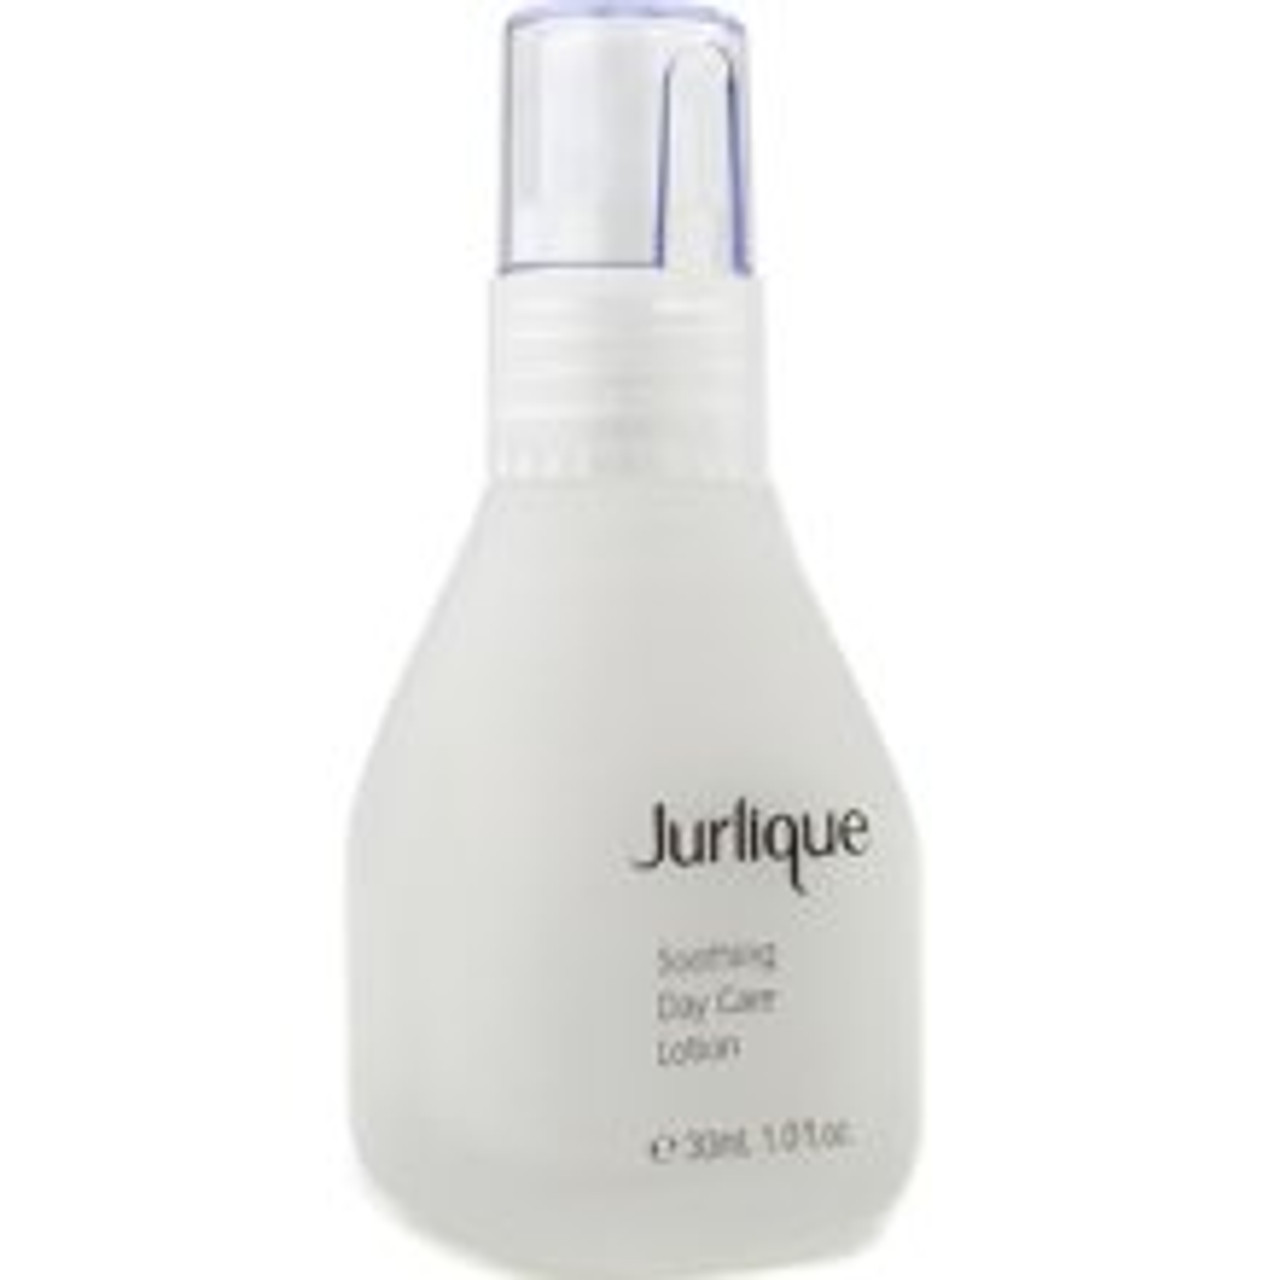 Jurlique Soothing Day Care Lotion - 1 oz (102701)